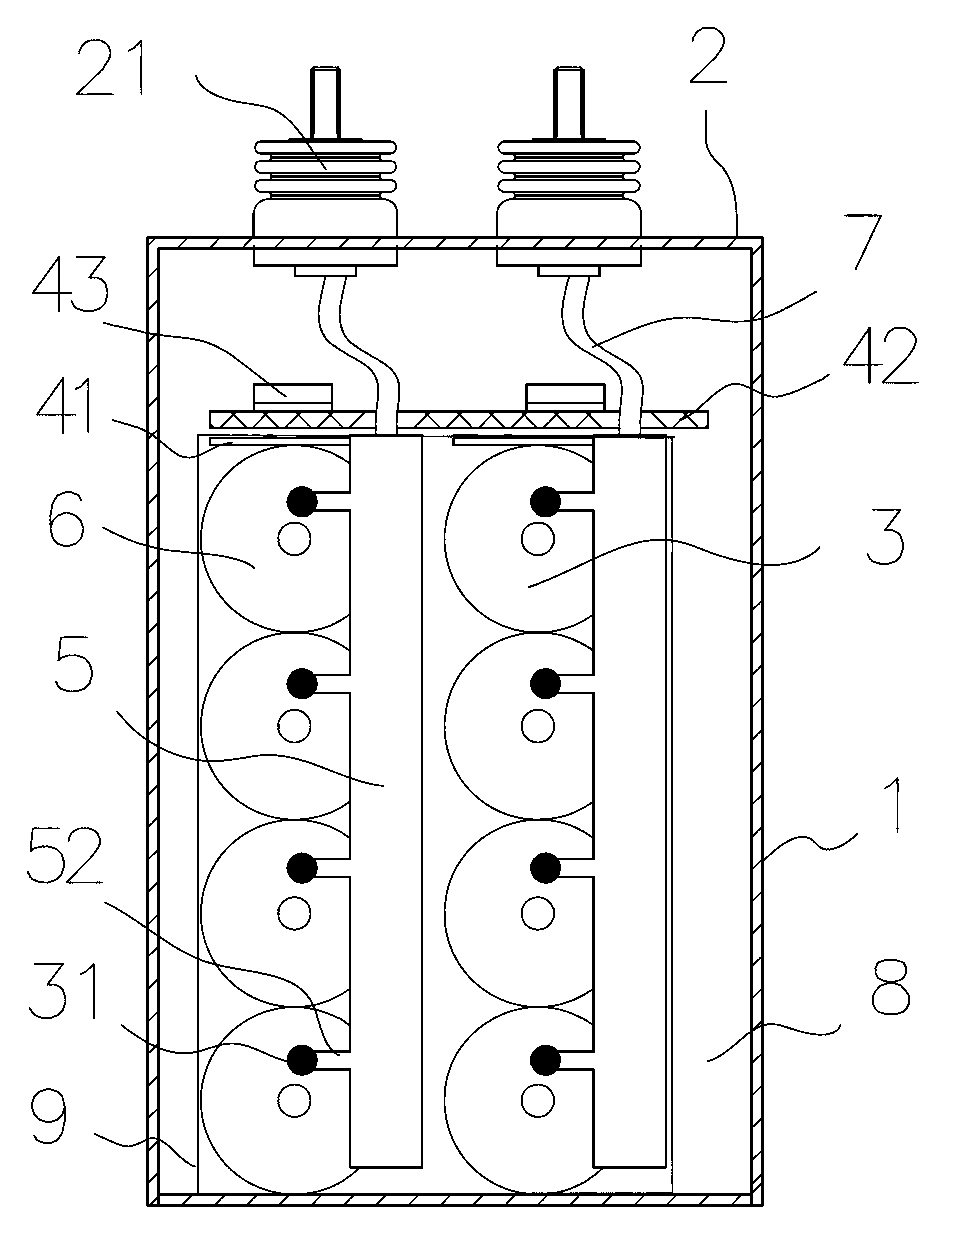 High-power power electronic capacitor for elastic connection among core sets and copper bars